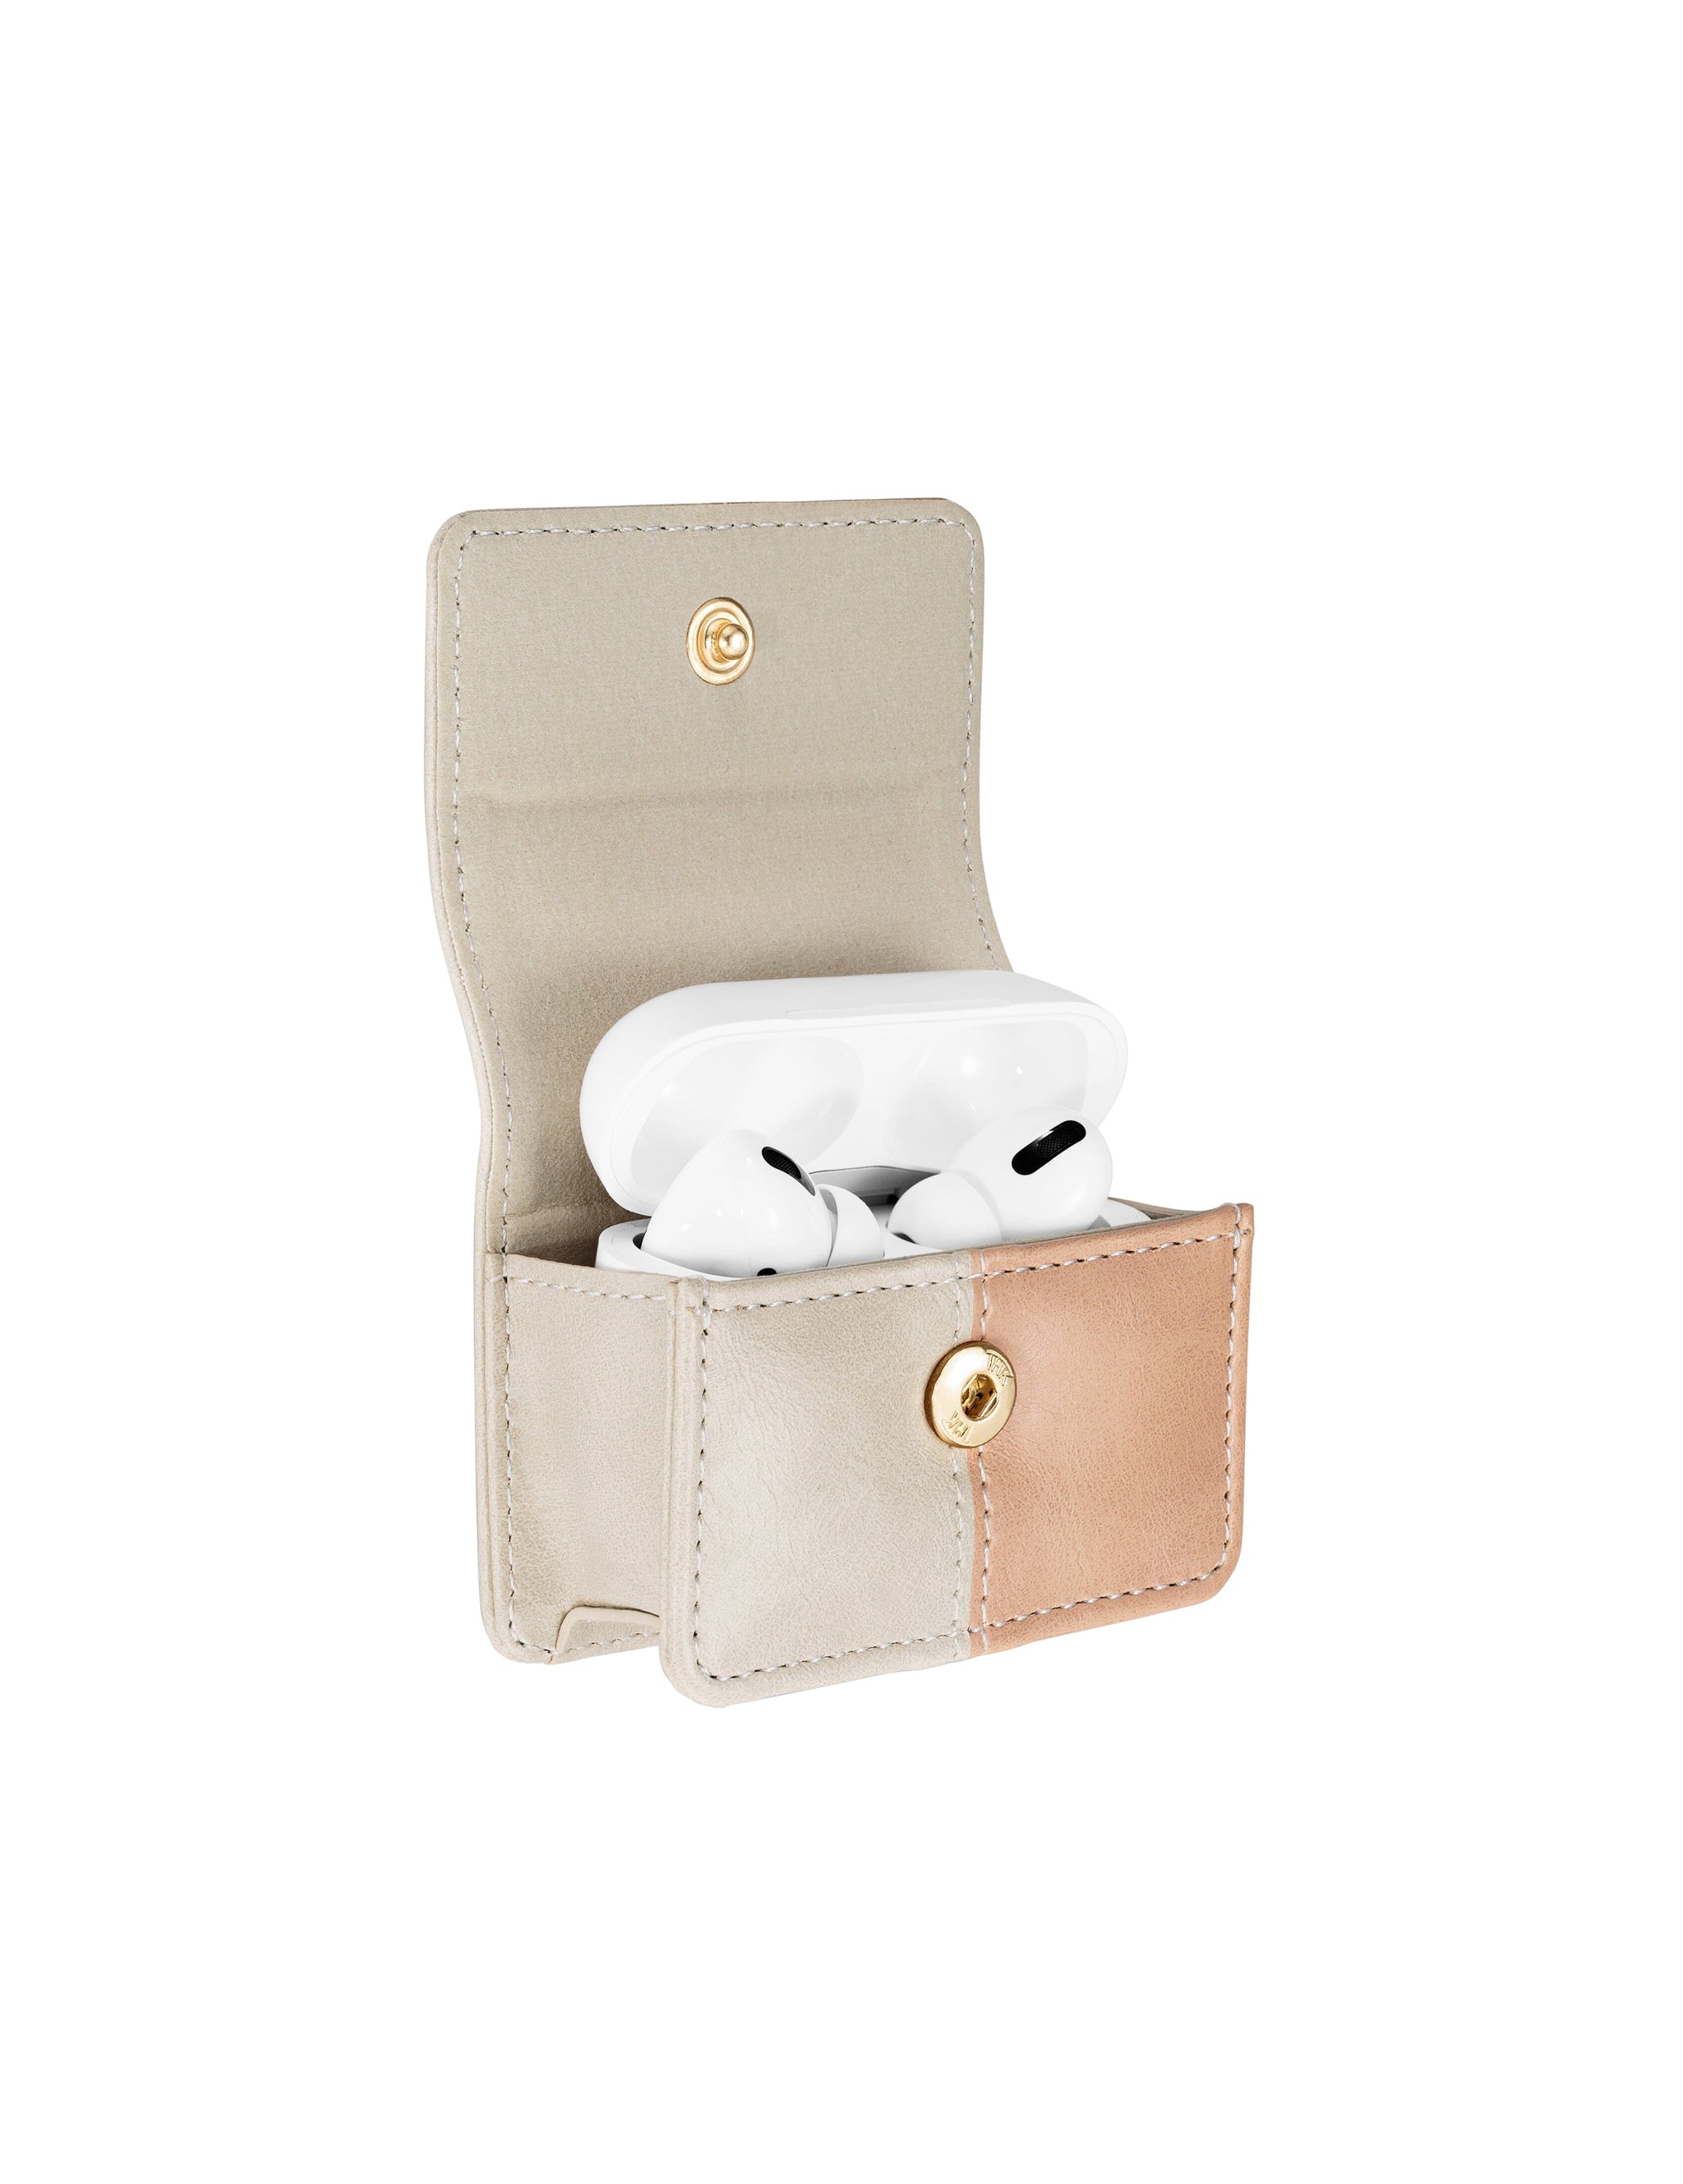 Apple AirPods Pro Case with Gold-tone or Black Chain Crossbody